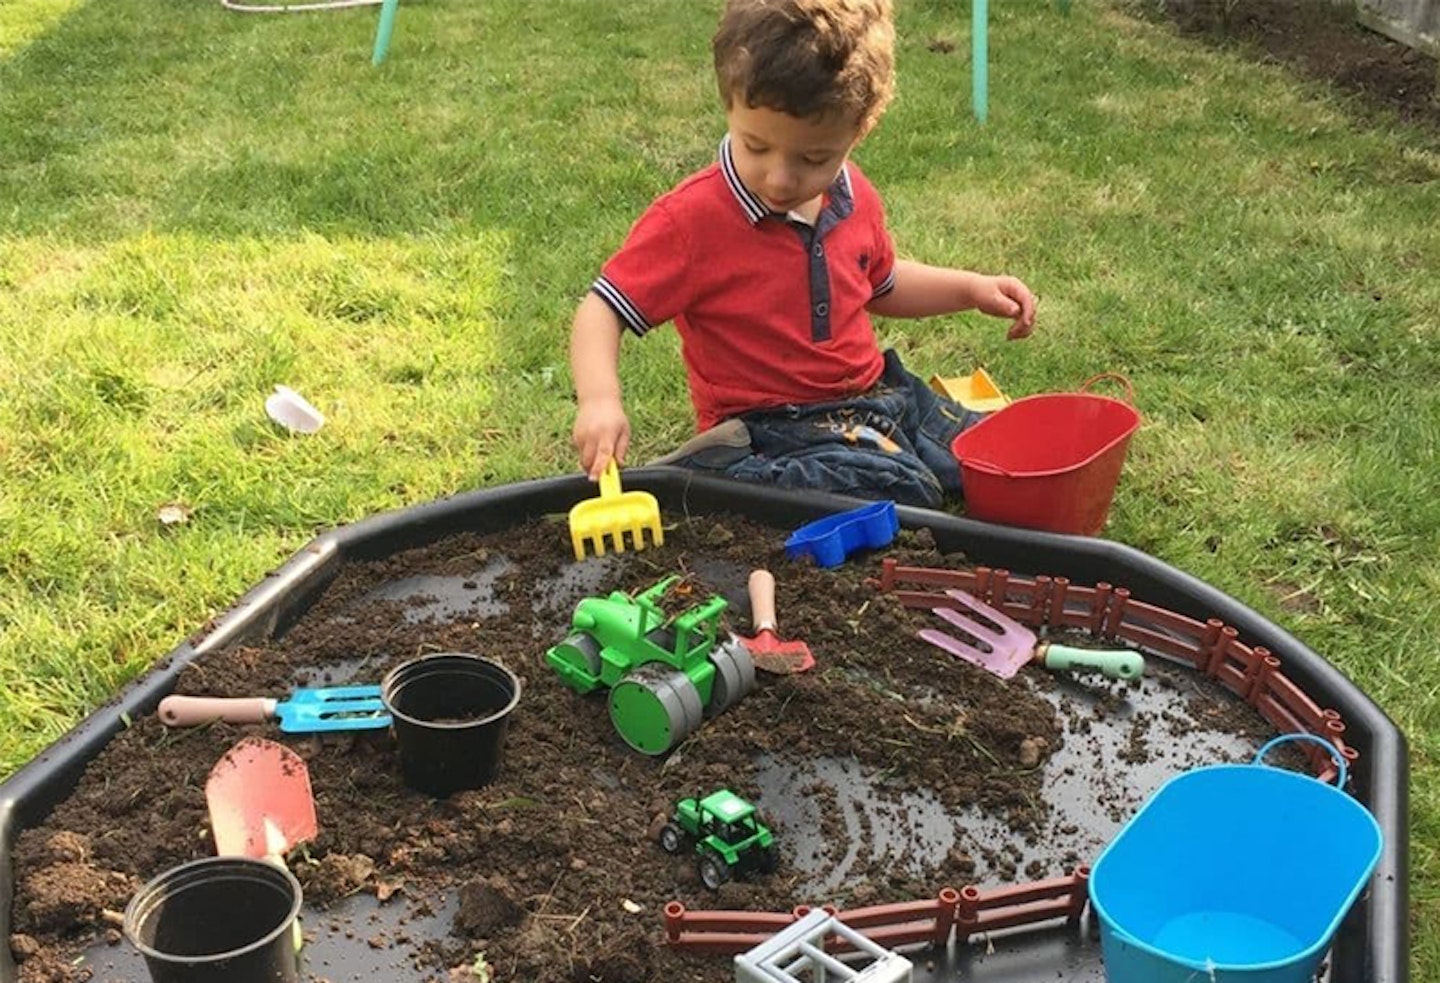 My Love for All Things Tuff Tray - Why I Recommend this Toy and Play Ideas